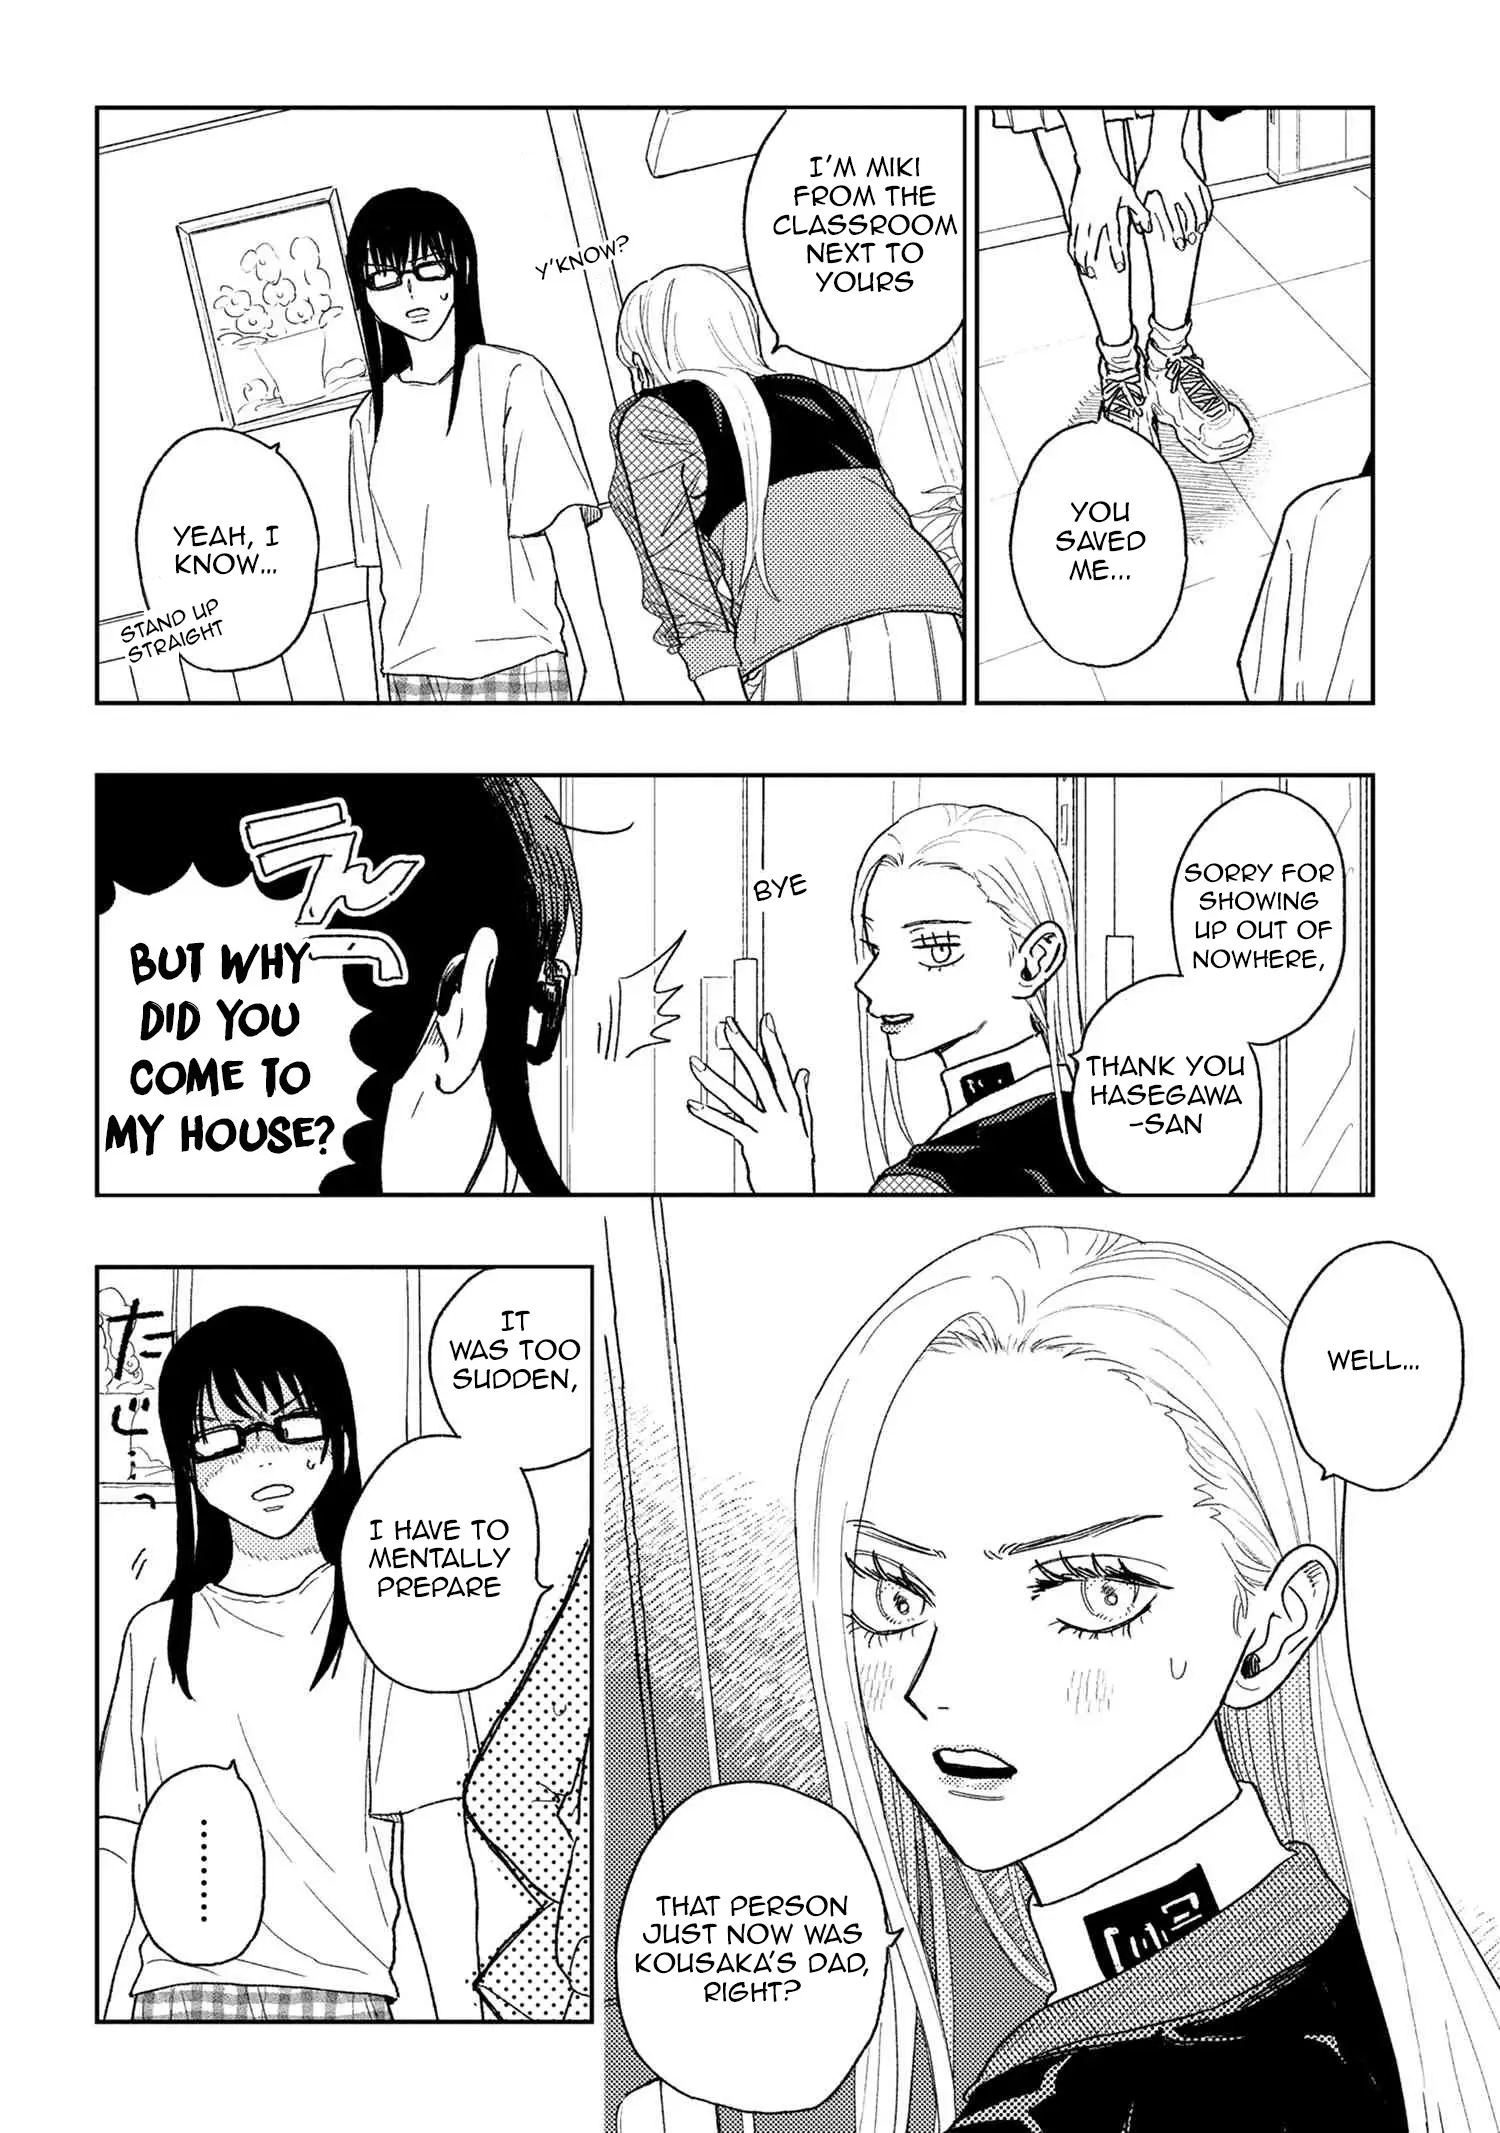 I Love You, Miki! - 21 page 6-953c4646